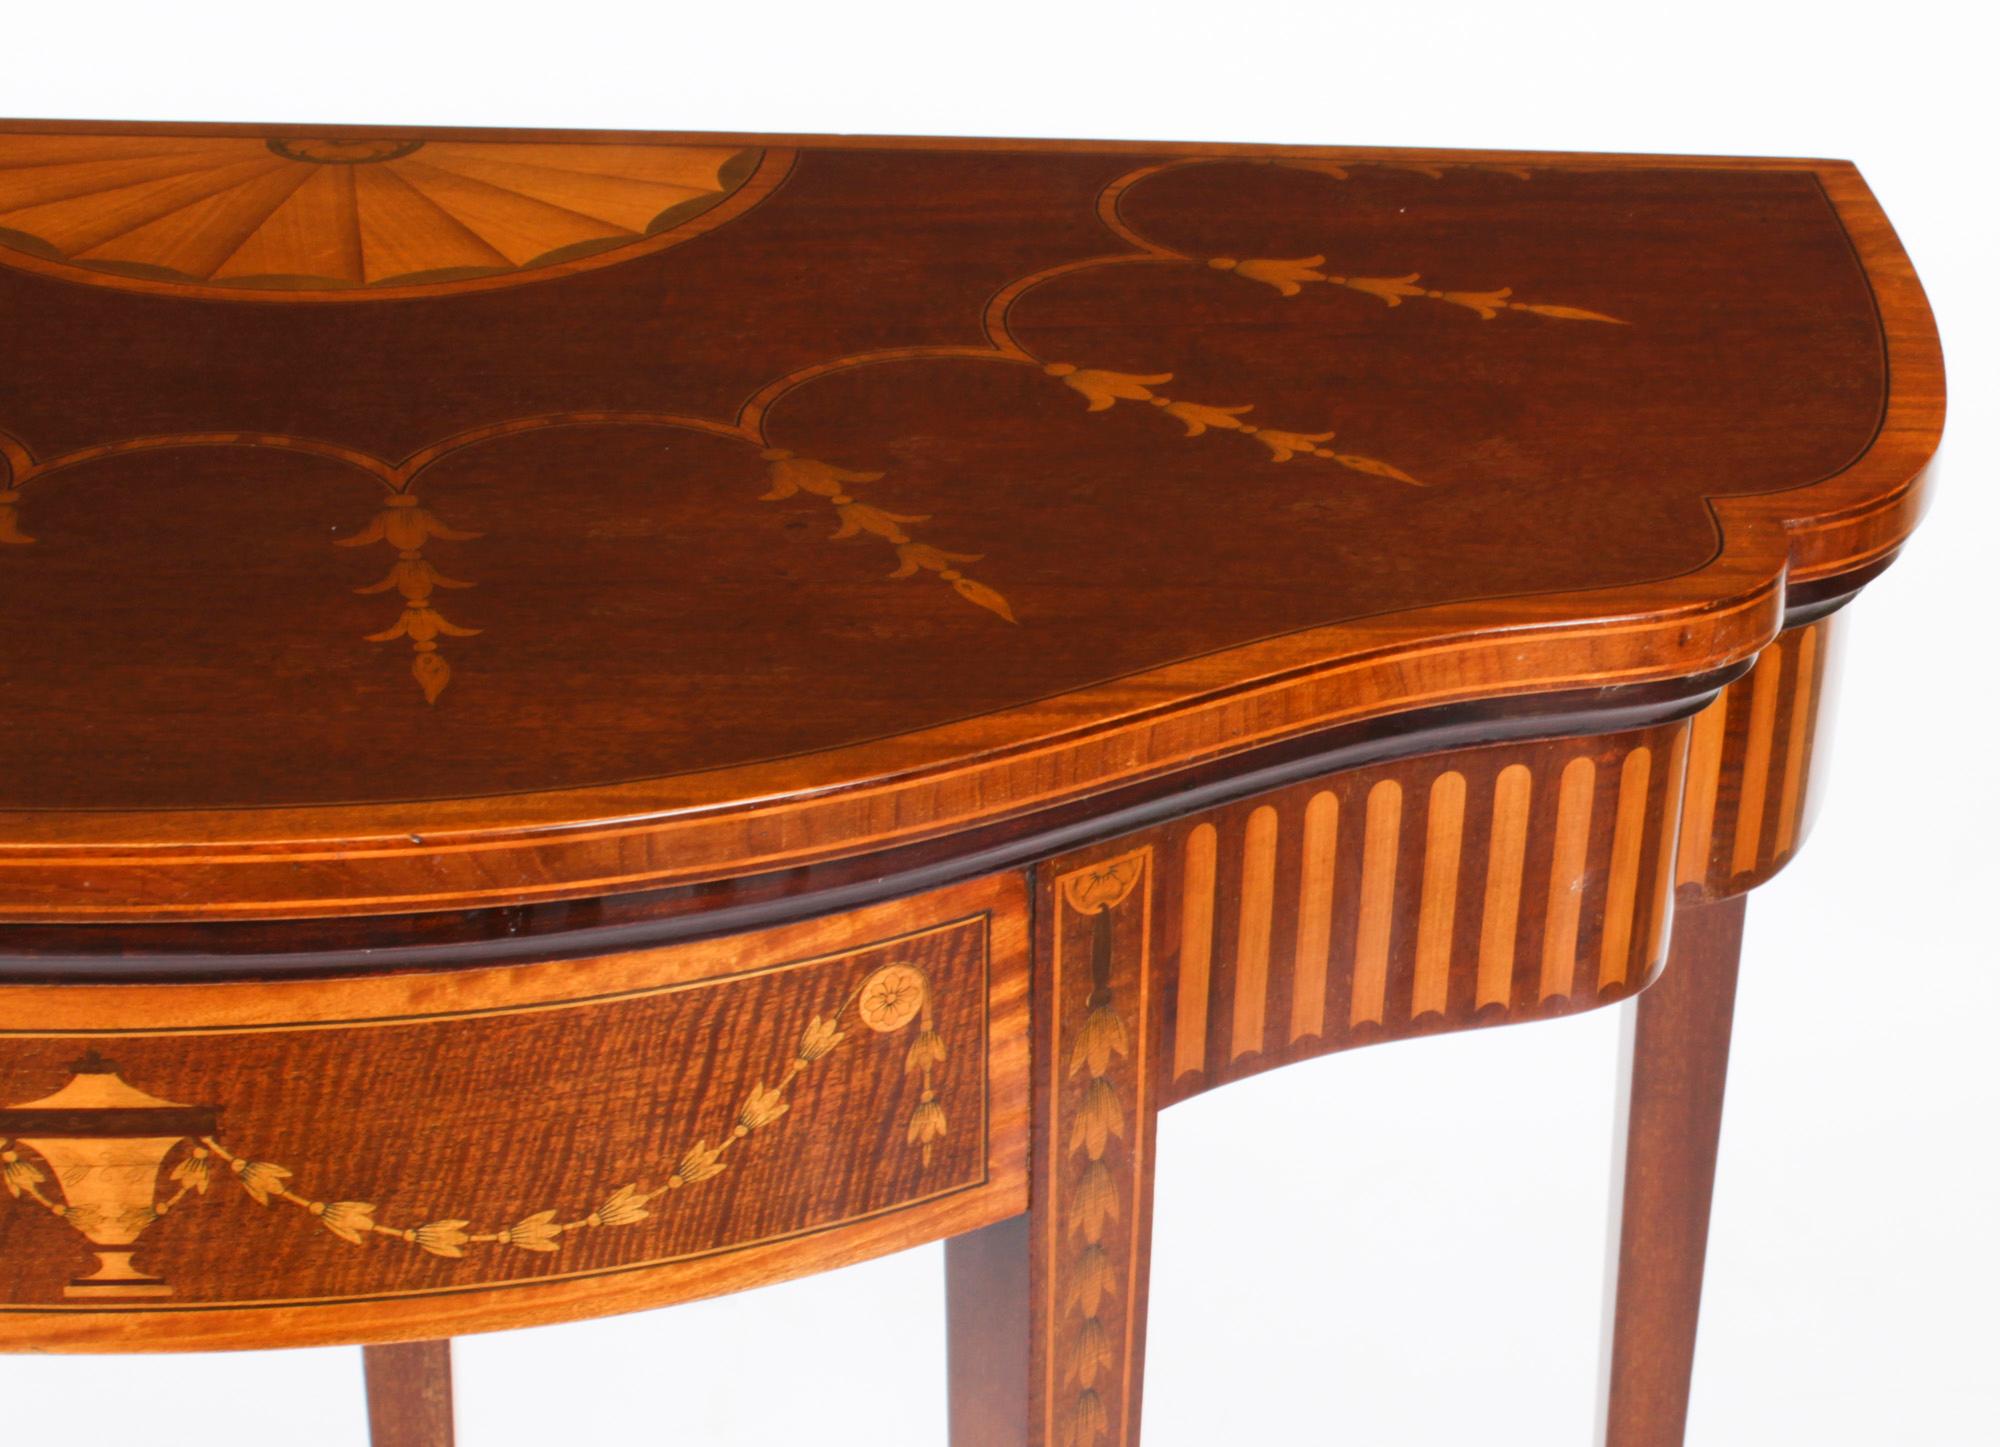 Antique Mahogany and Satinwood Inlaid Serpentine Card Console Table 19th Century For Sale 9